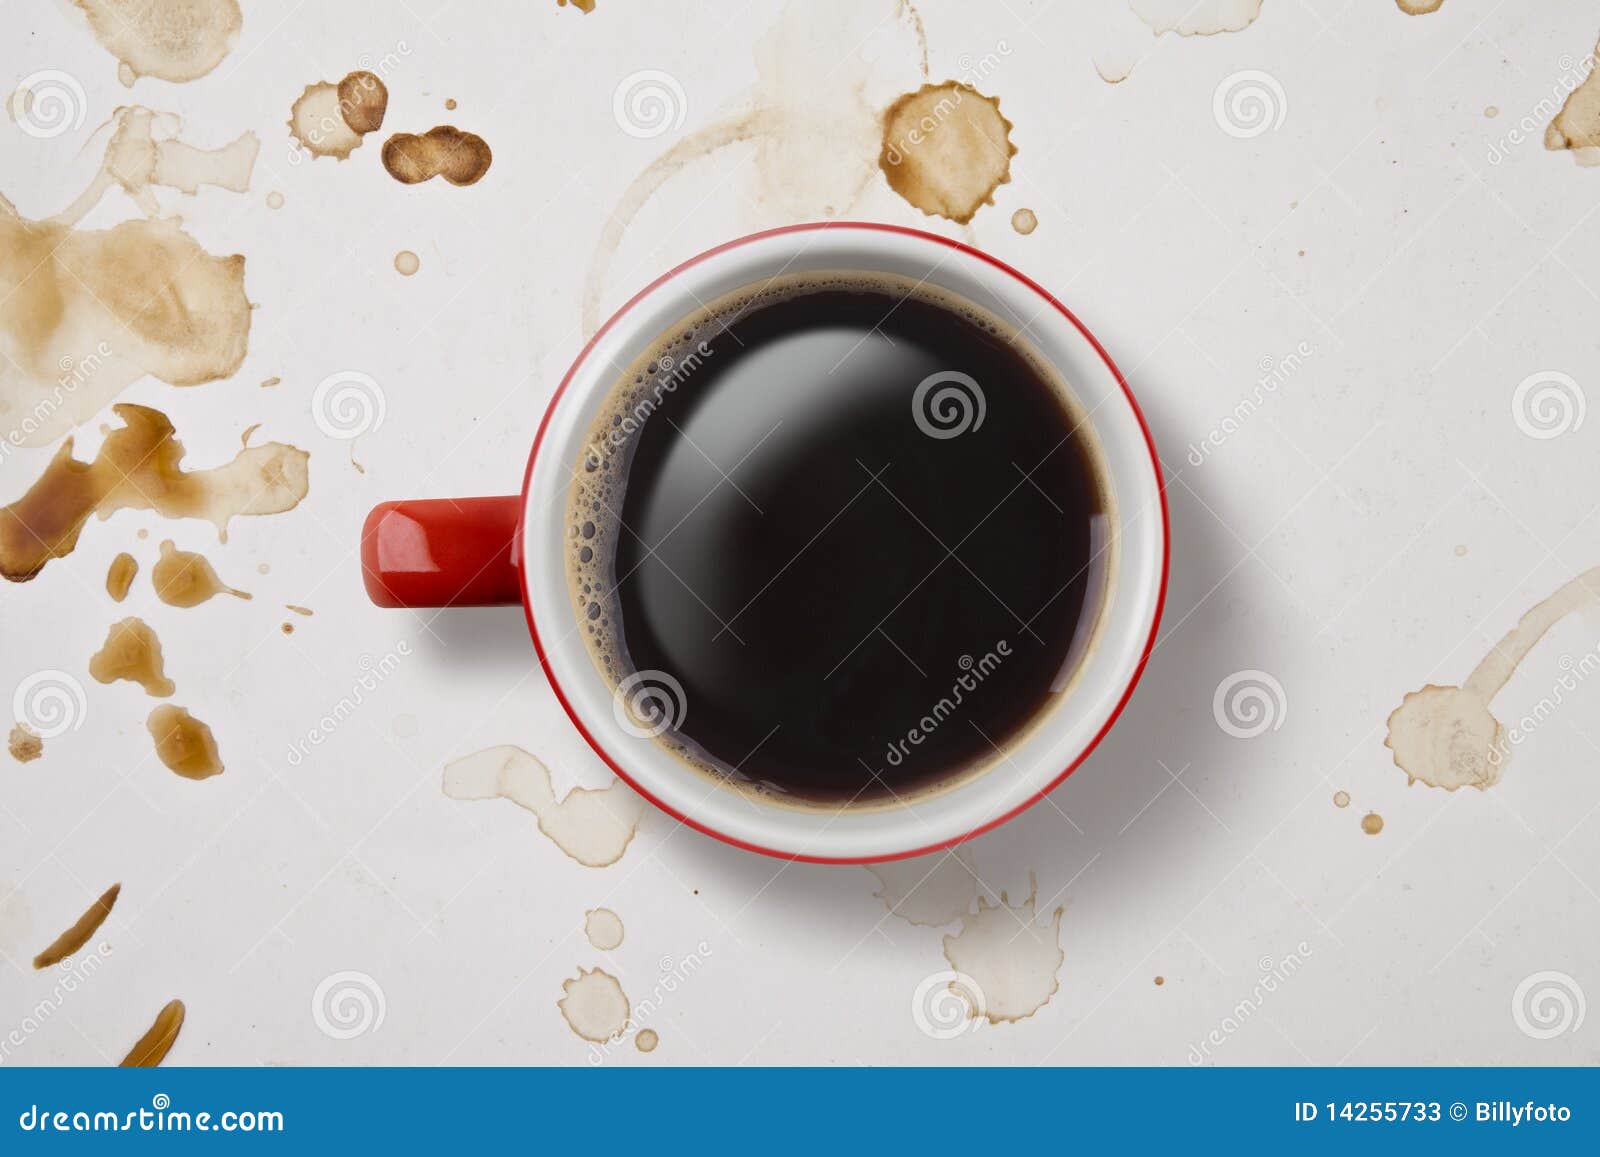 https://thumbs.dreamstime.com/z/cup-coffee-shot-above-14255733.jpg